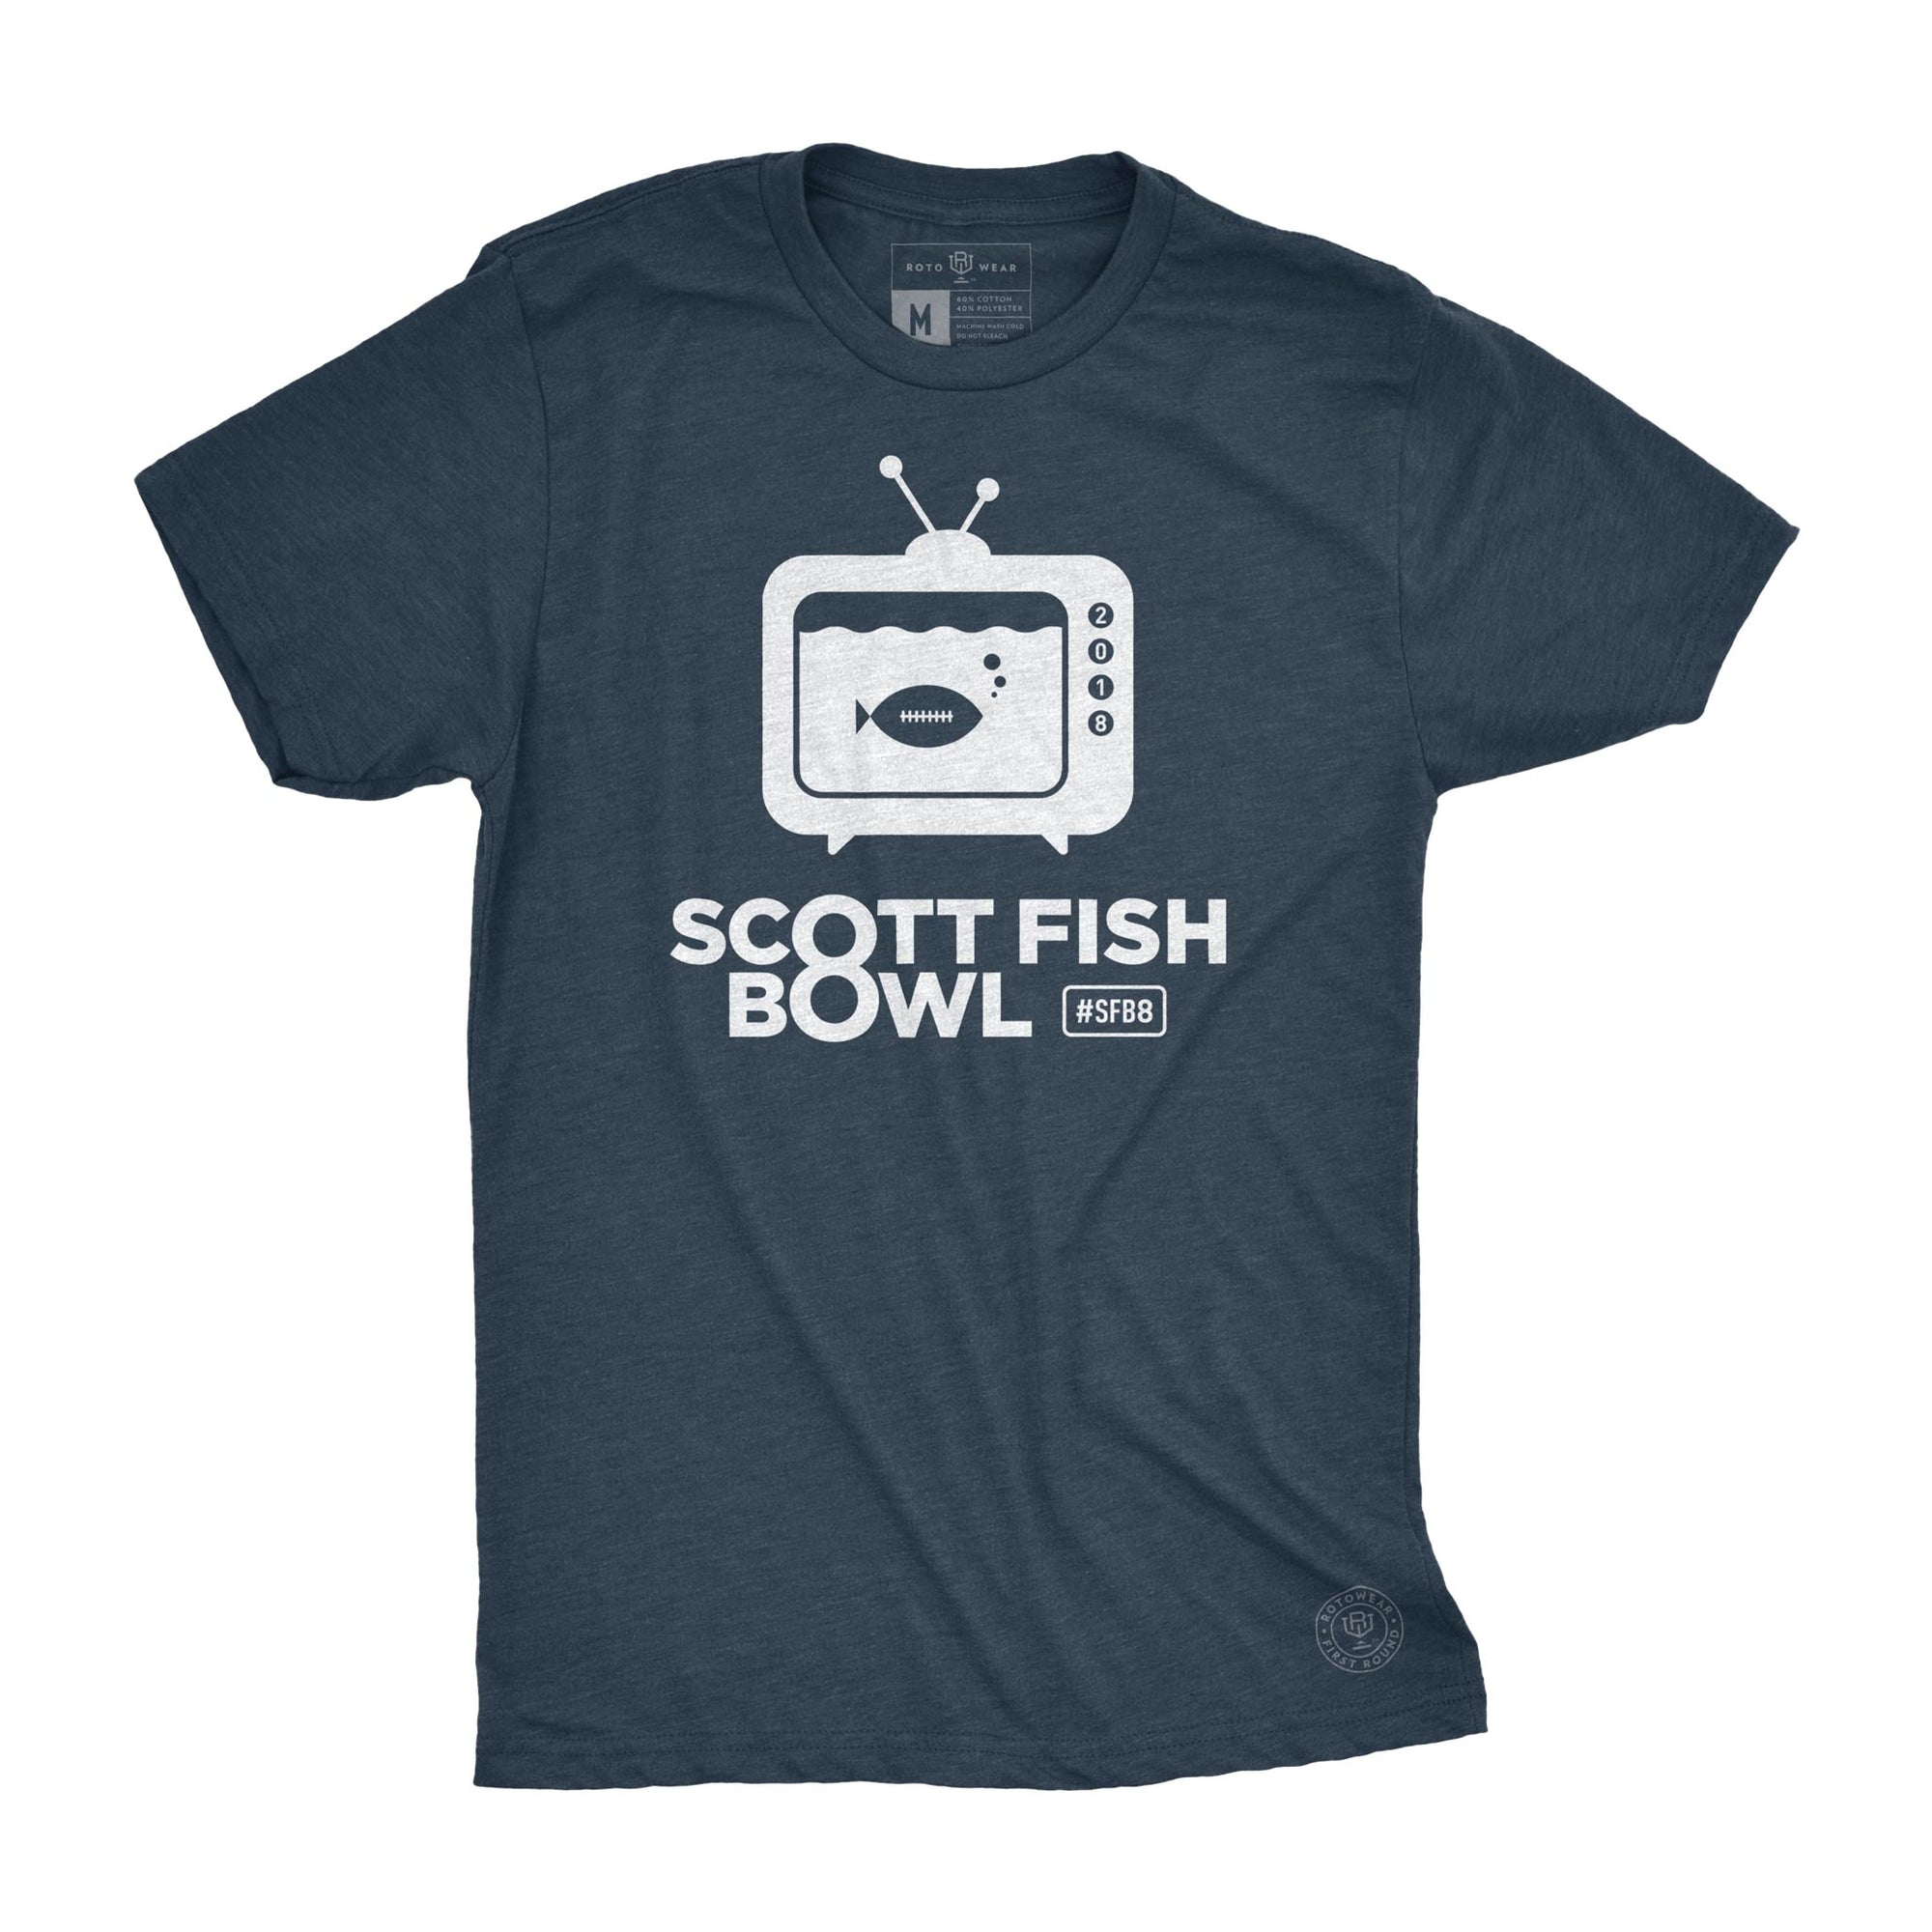 SFB8 men’s t-shirt by RotoWear for fantasy football managers is the official shirt of the 2018 Scott Fish Bowl